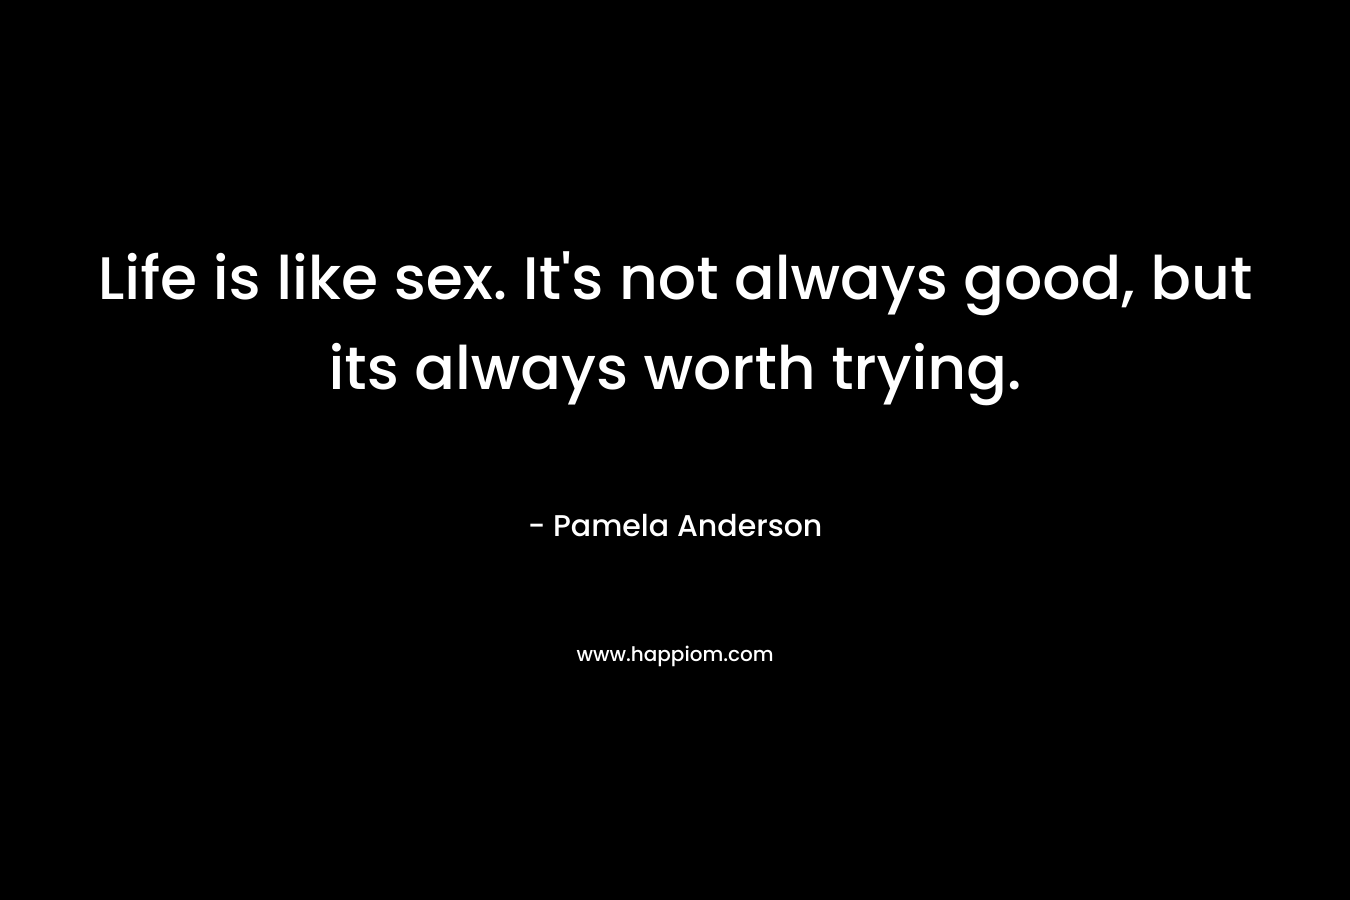 Life is like sex. It's not always good, but its always worth trying.